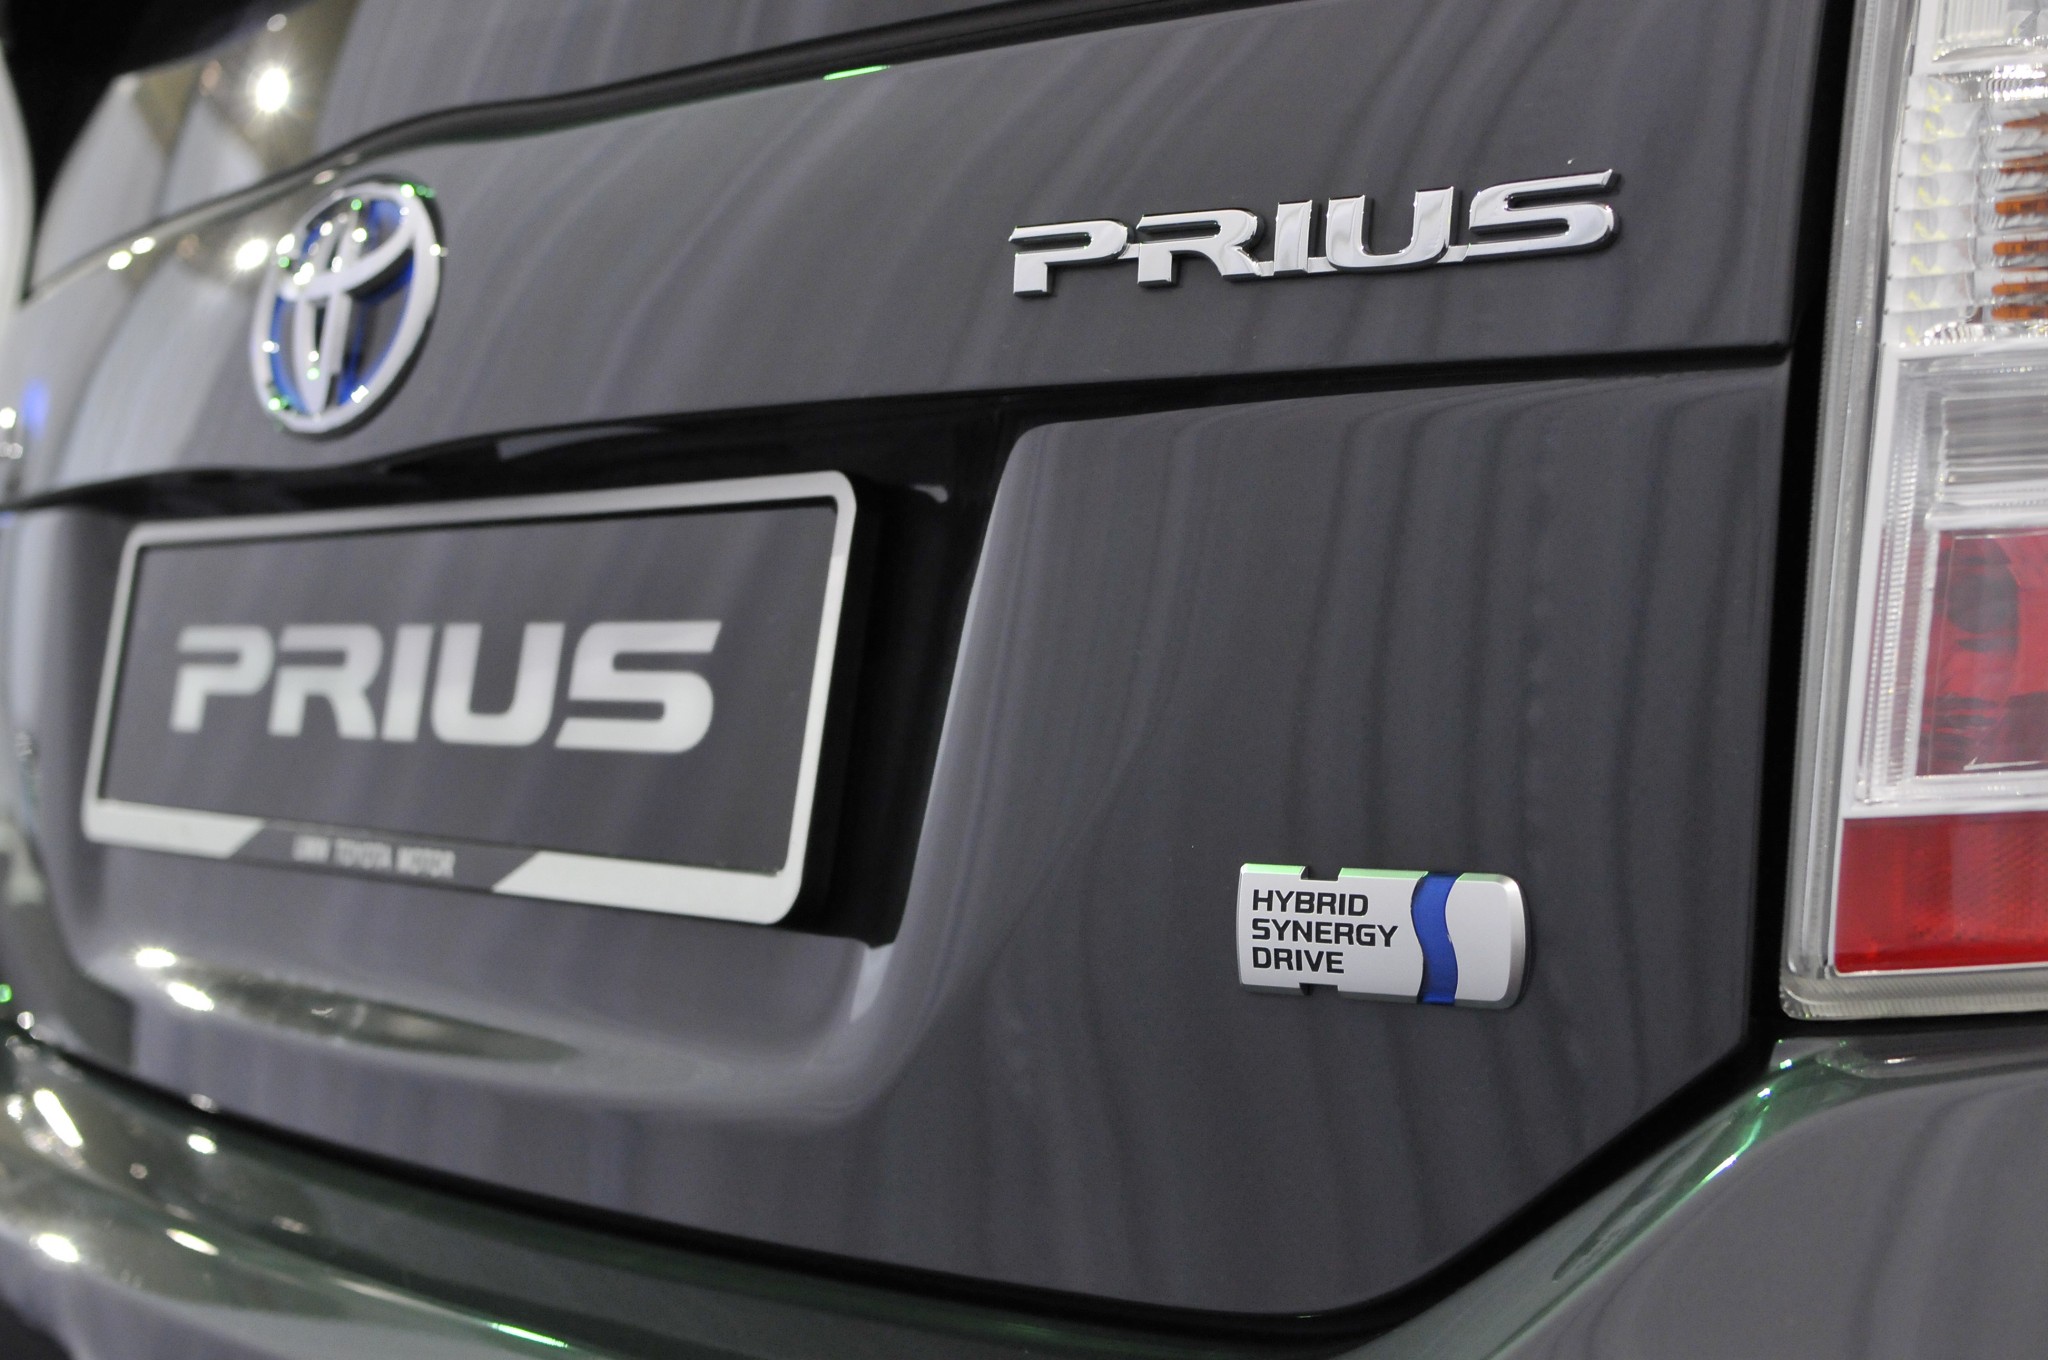 Prius Purchases Could Reflect Conforming to a Local Social Norm